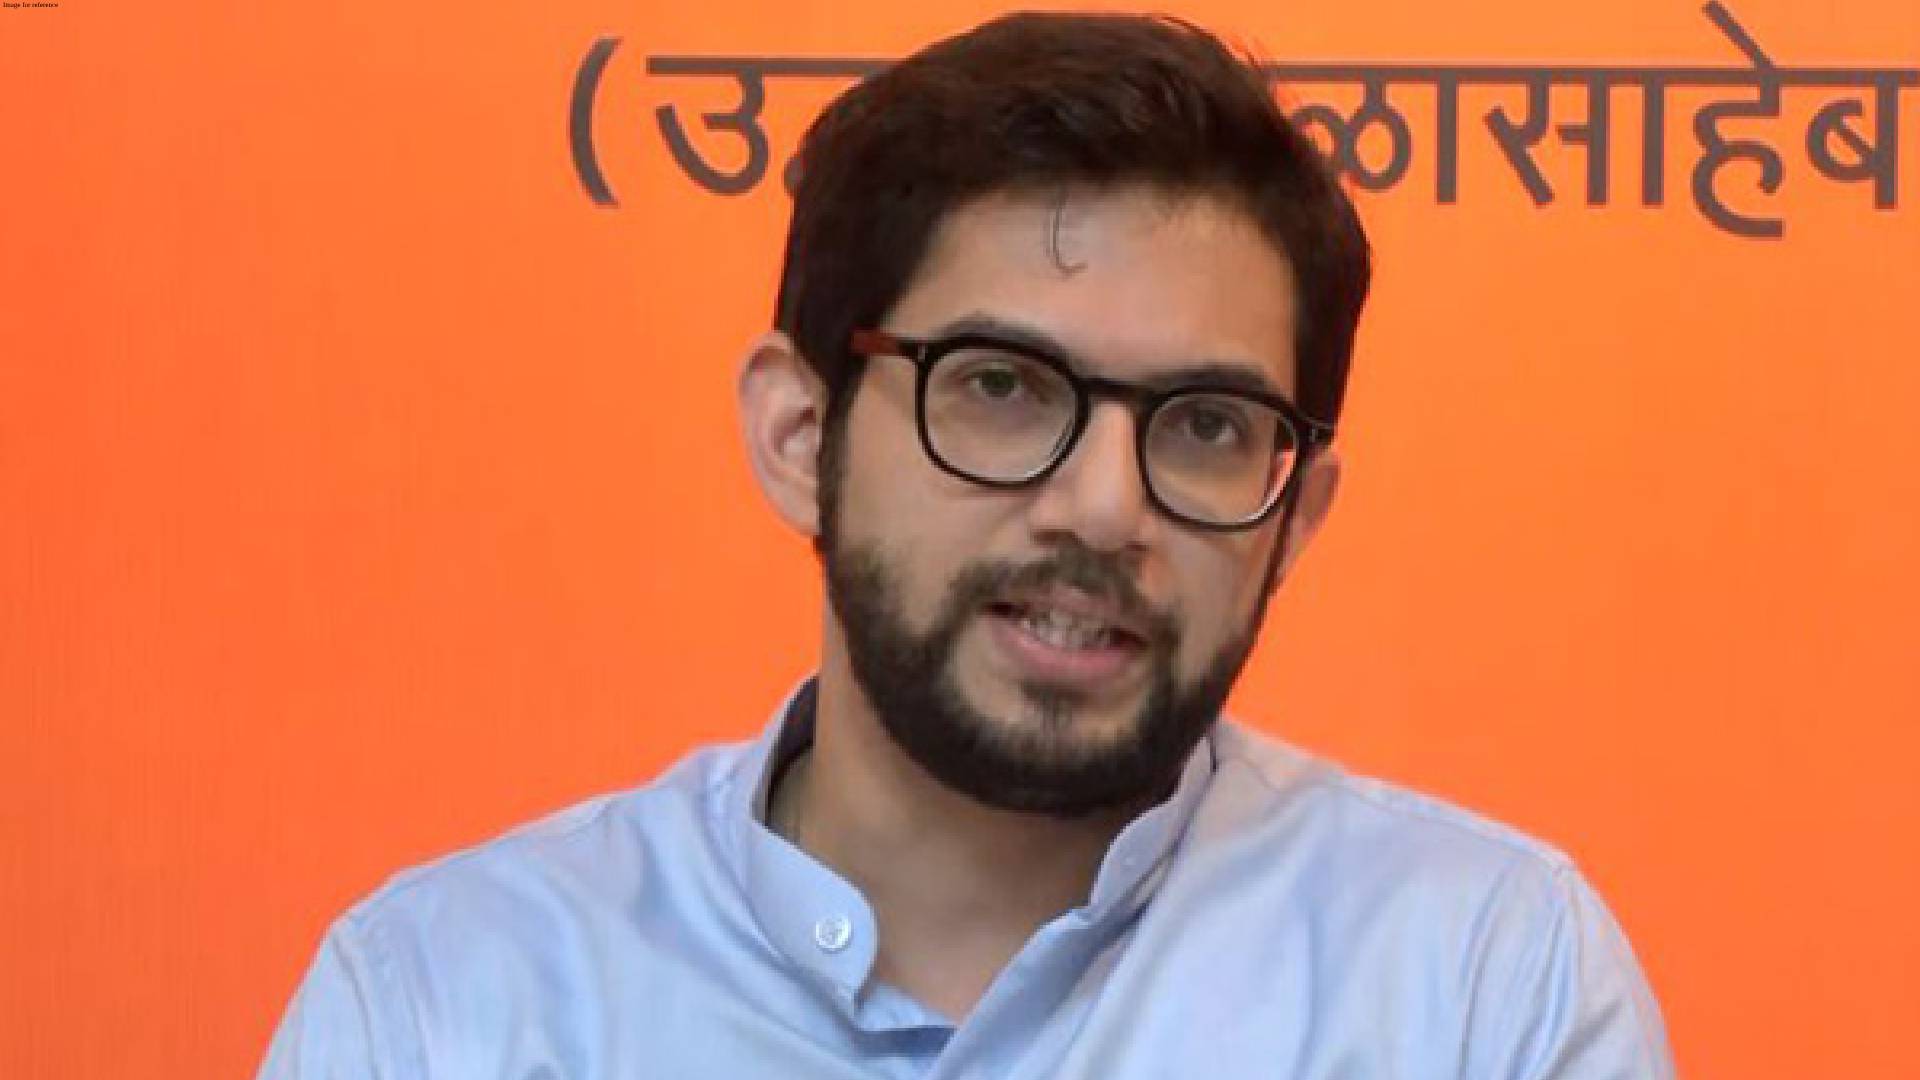 Mumbai BMW hit-and-run case: CM Shinde must stop grandstanding to divert attention, says Aaditya Thackeray